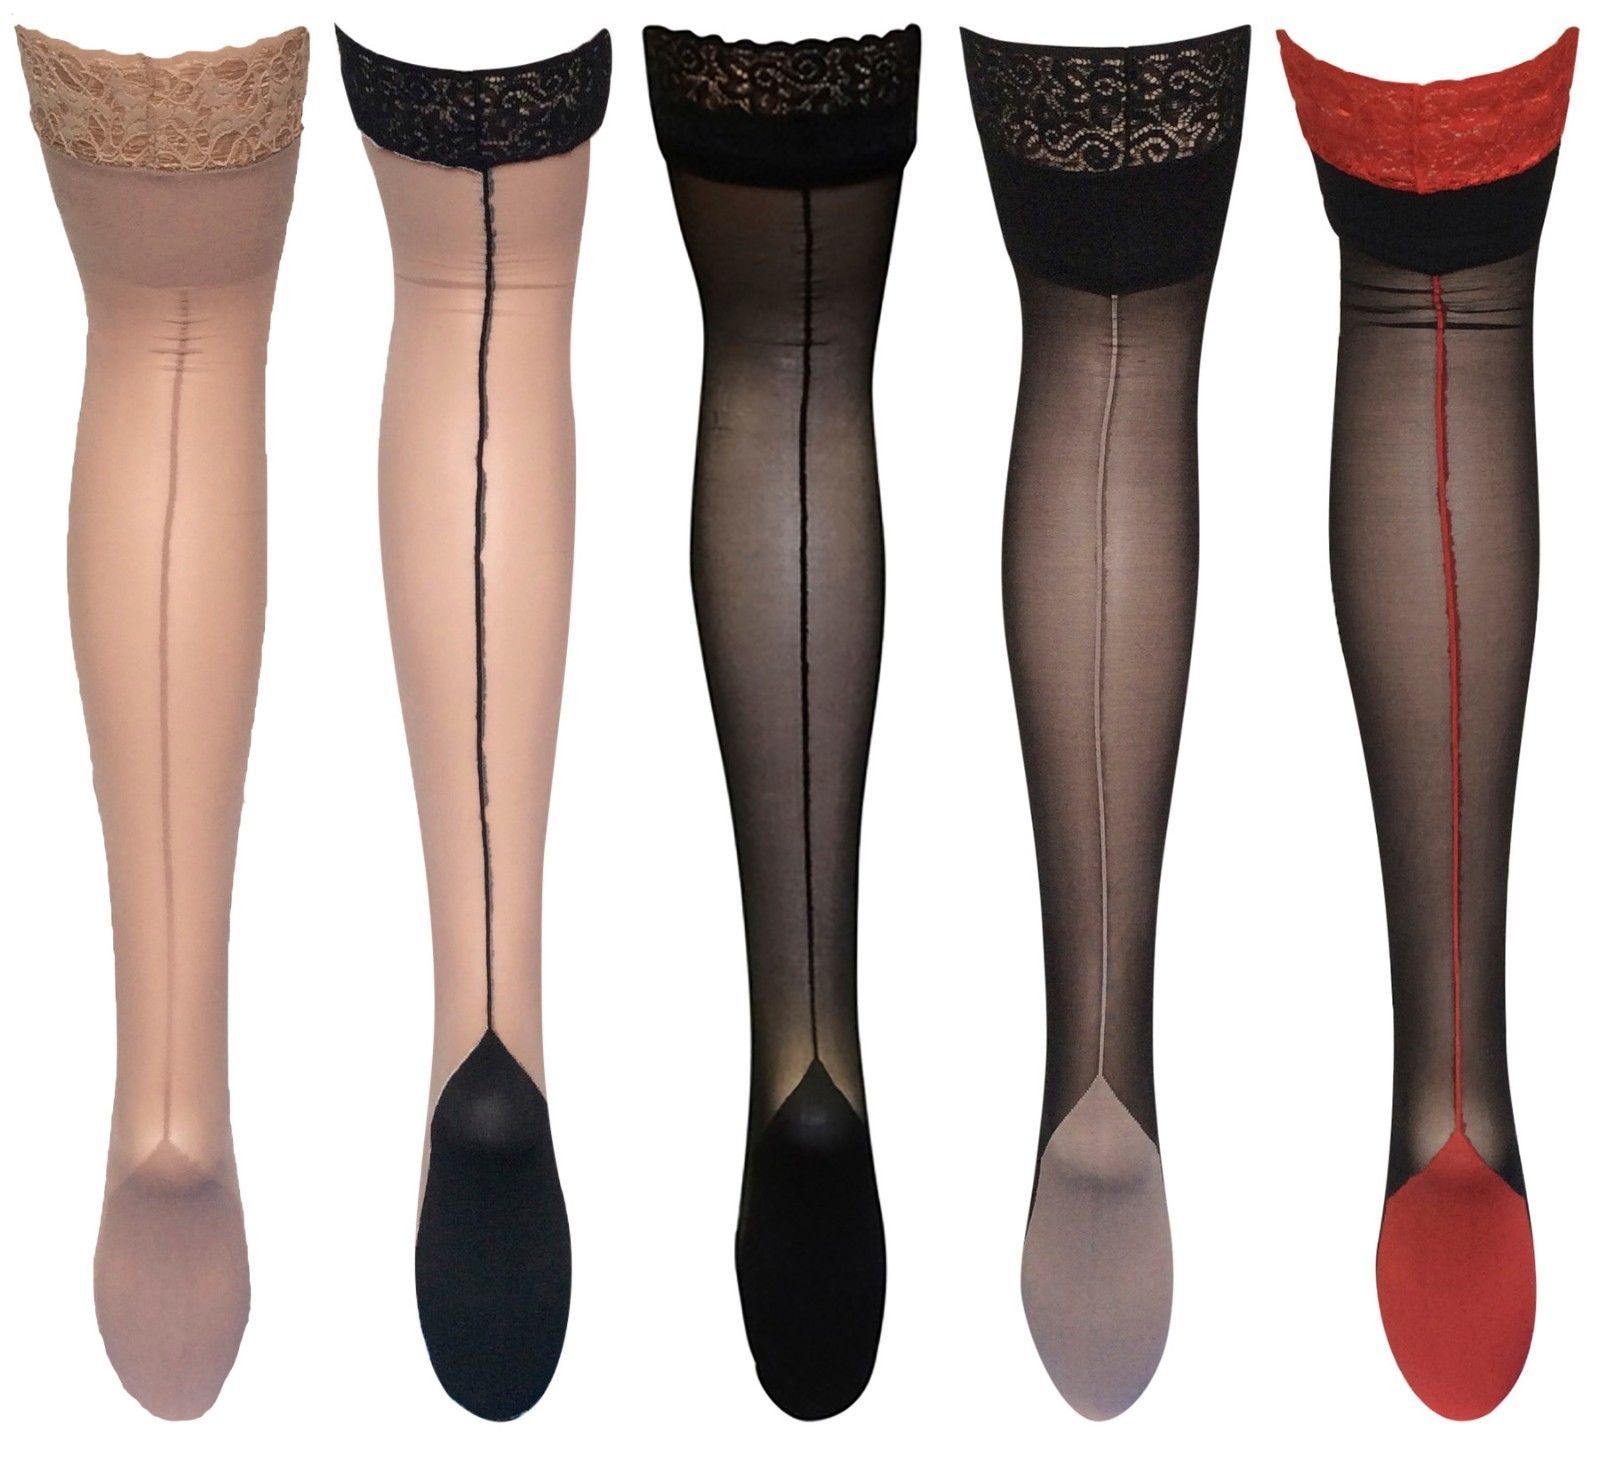 Seamed Stockings Cuban Heeled For Sale Only Left At